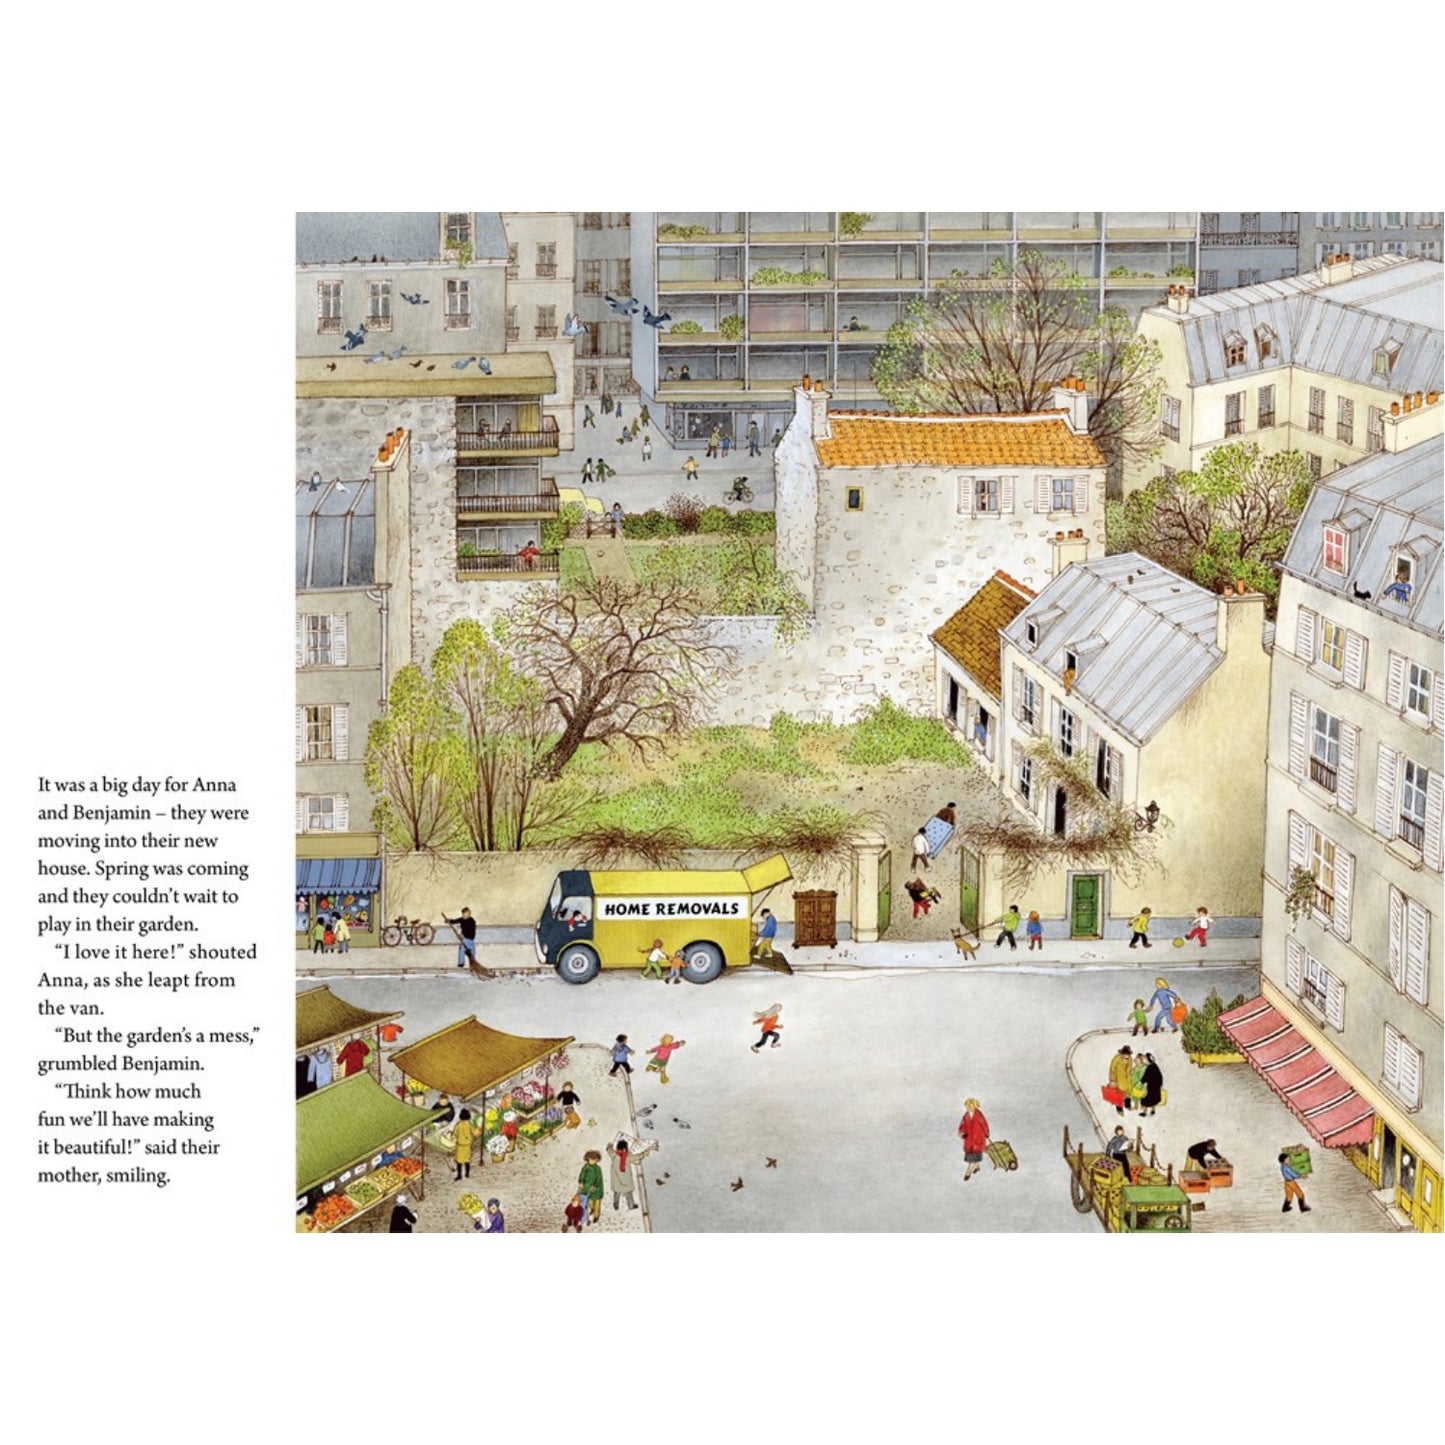 A Year in Our New Garden | Gerda Muller | Hardcover | Children’s Book on Nature